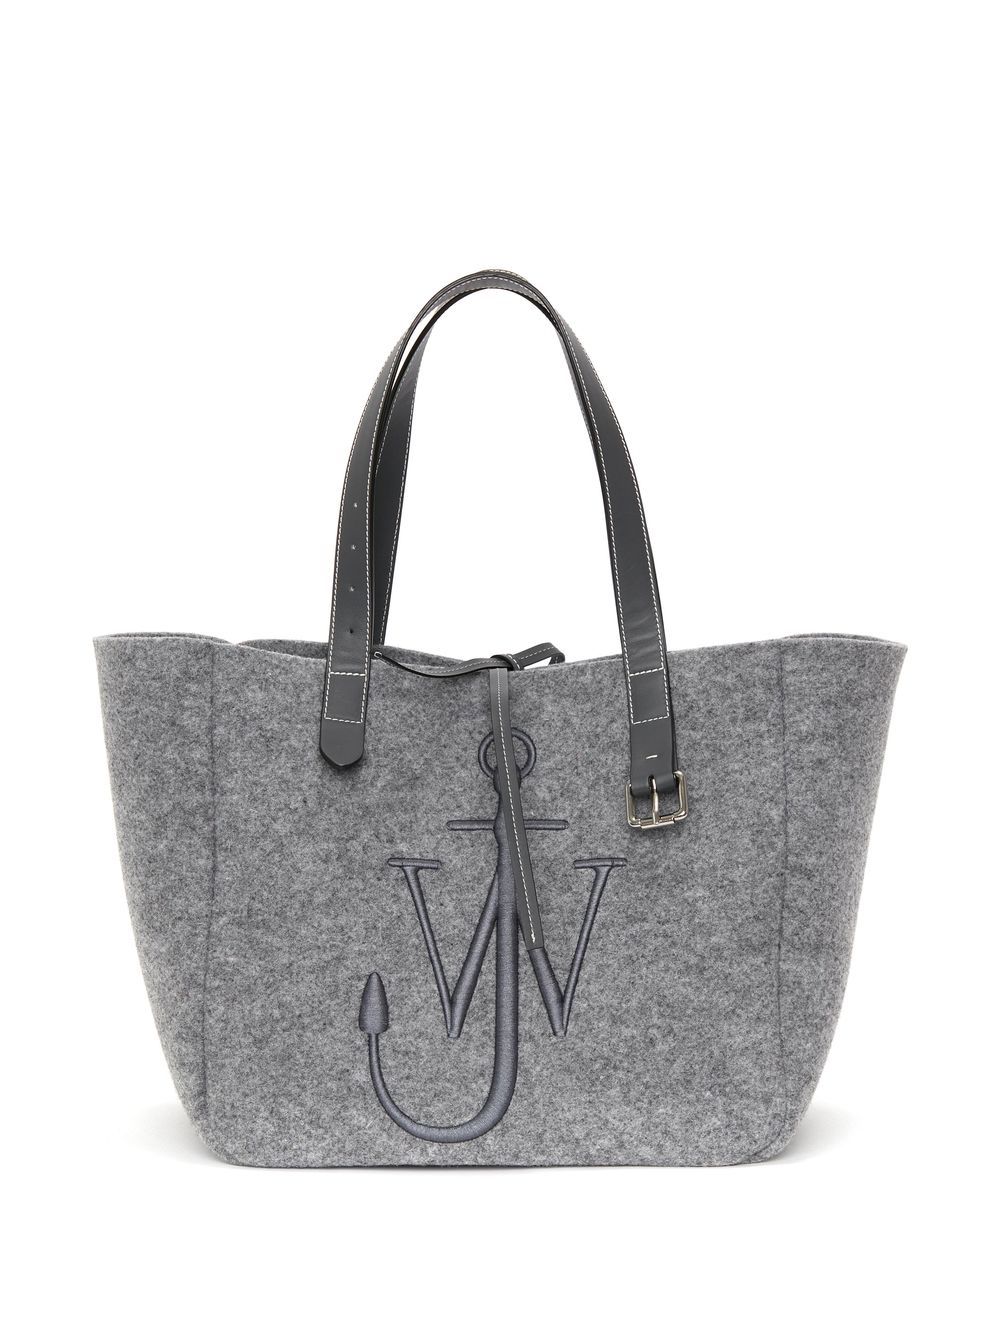 JW Anderson embroidered-logo tote bag - Grey